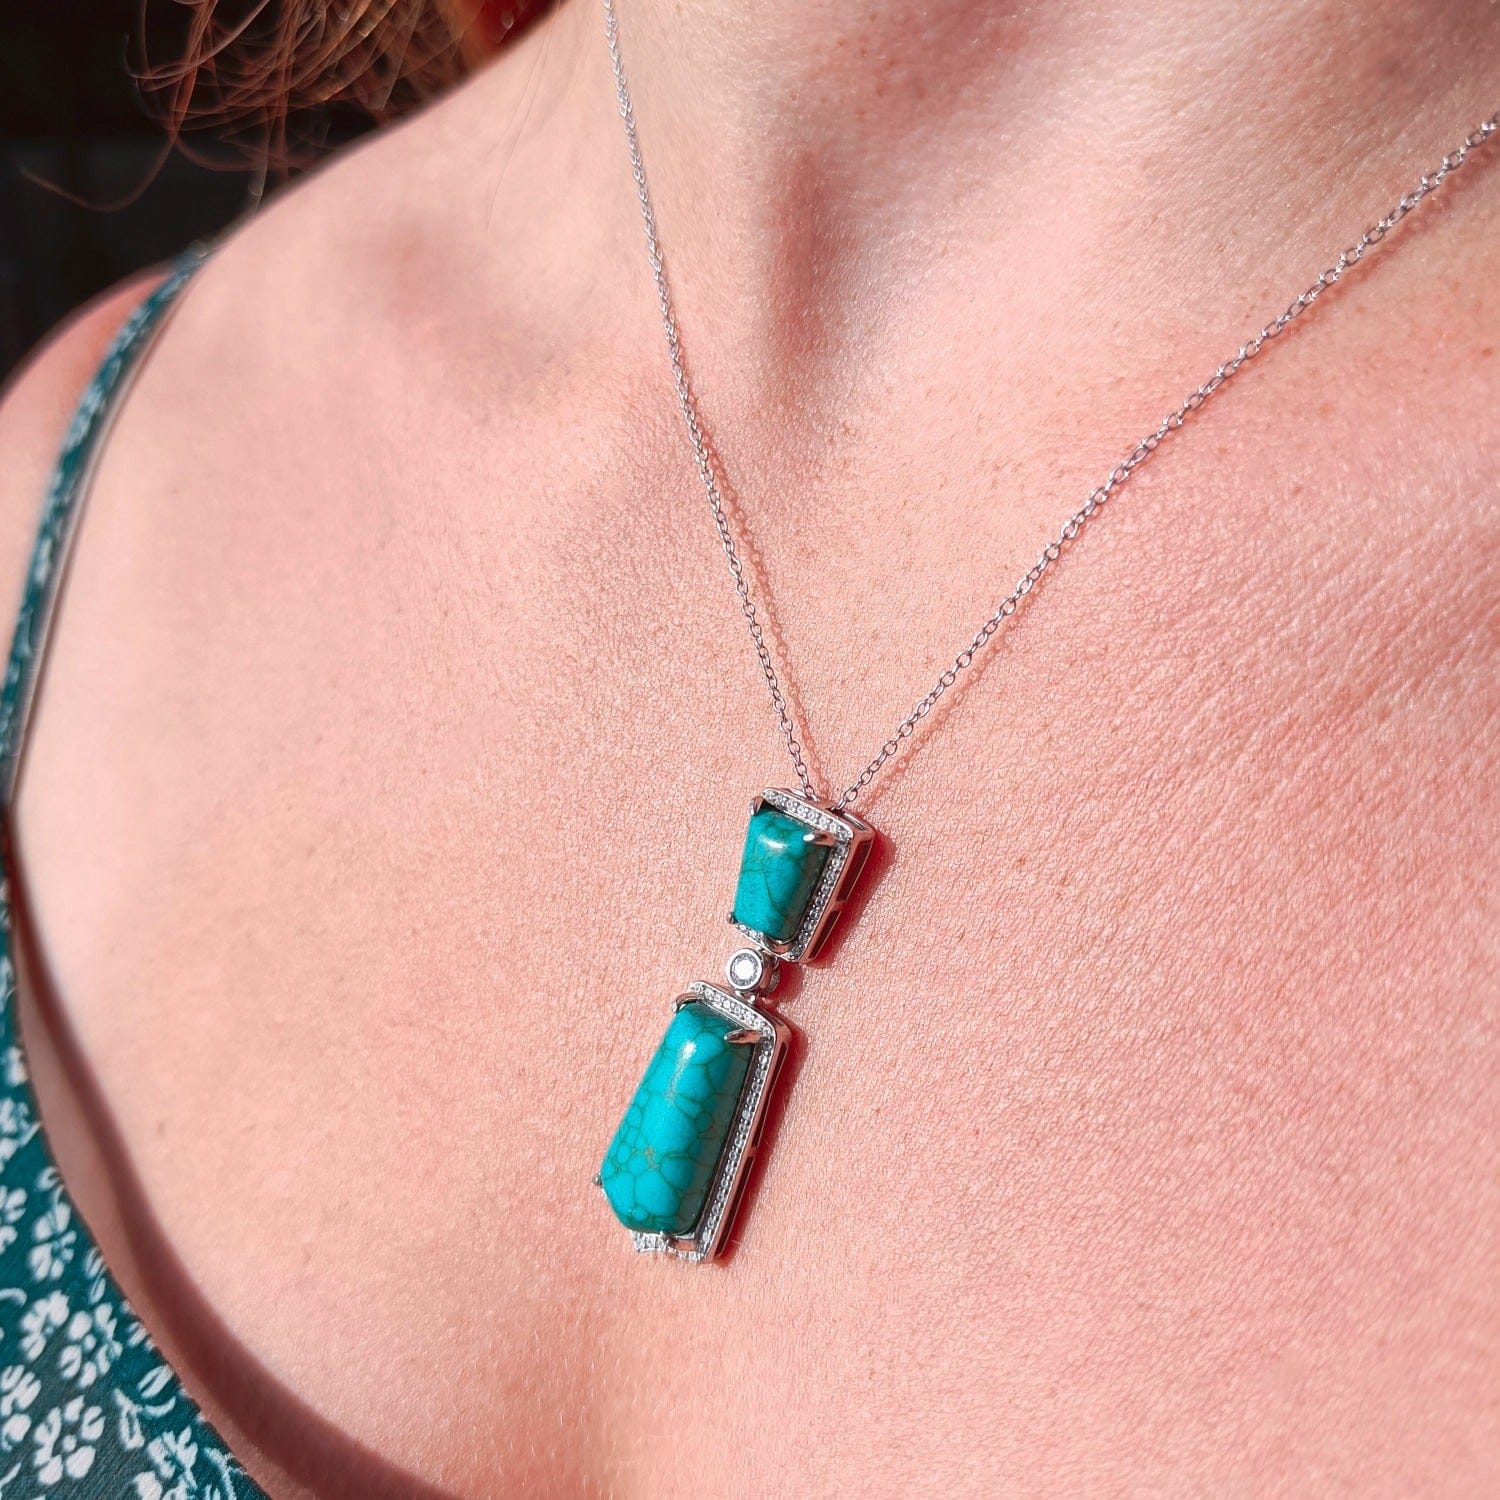 Turquoise Seabed Jewel Necklace featuring a turquoise pendant in a sterling silver setting on a model in sunlight